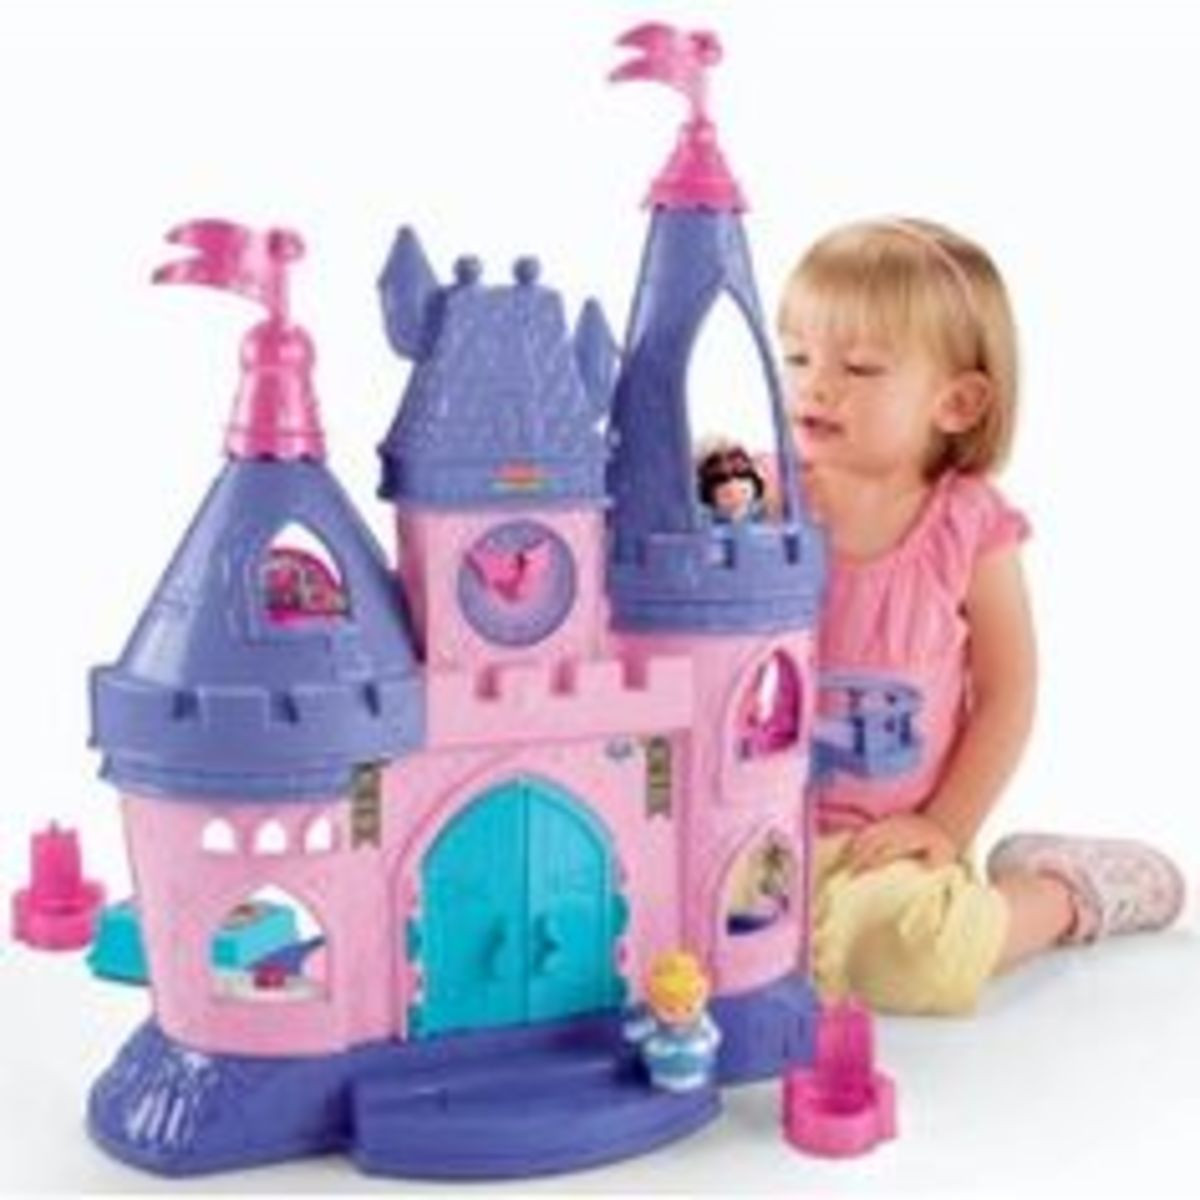 Gift Ideas For 2 Year Old Girls
 Best Christmas Gift Ideas For A 2 Year Old Baby Girl